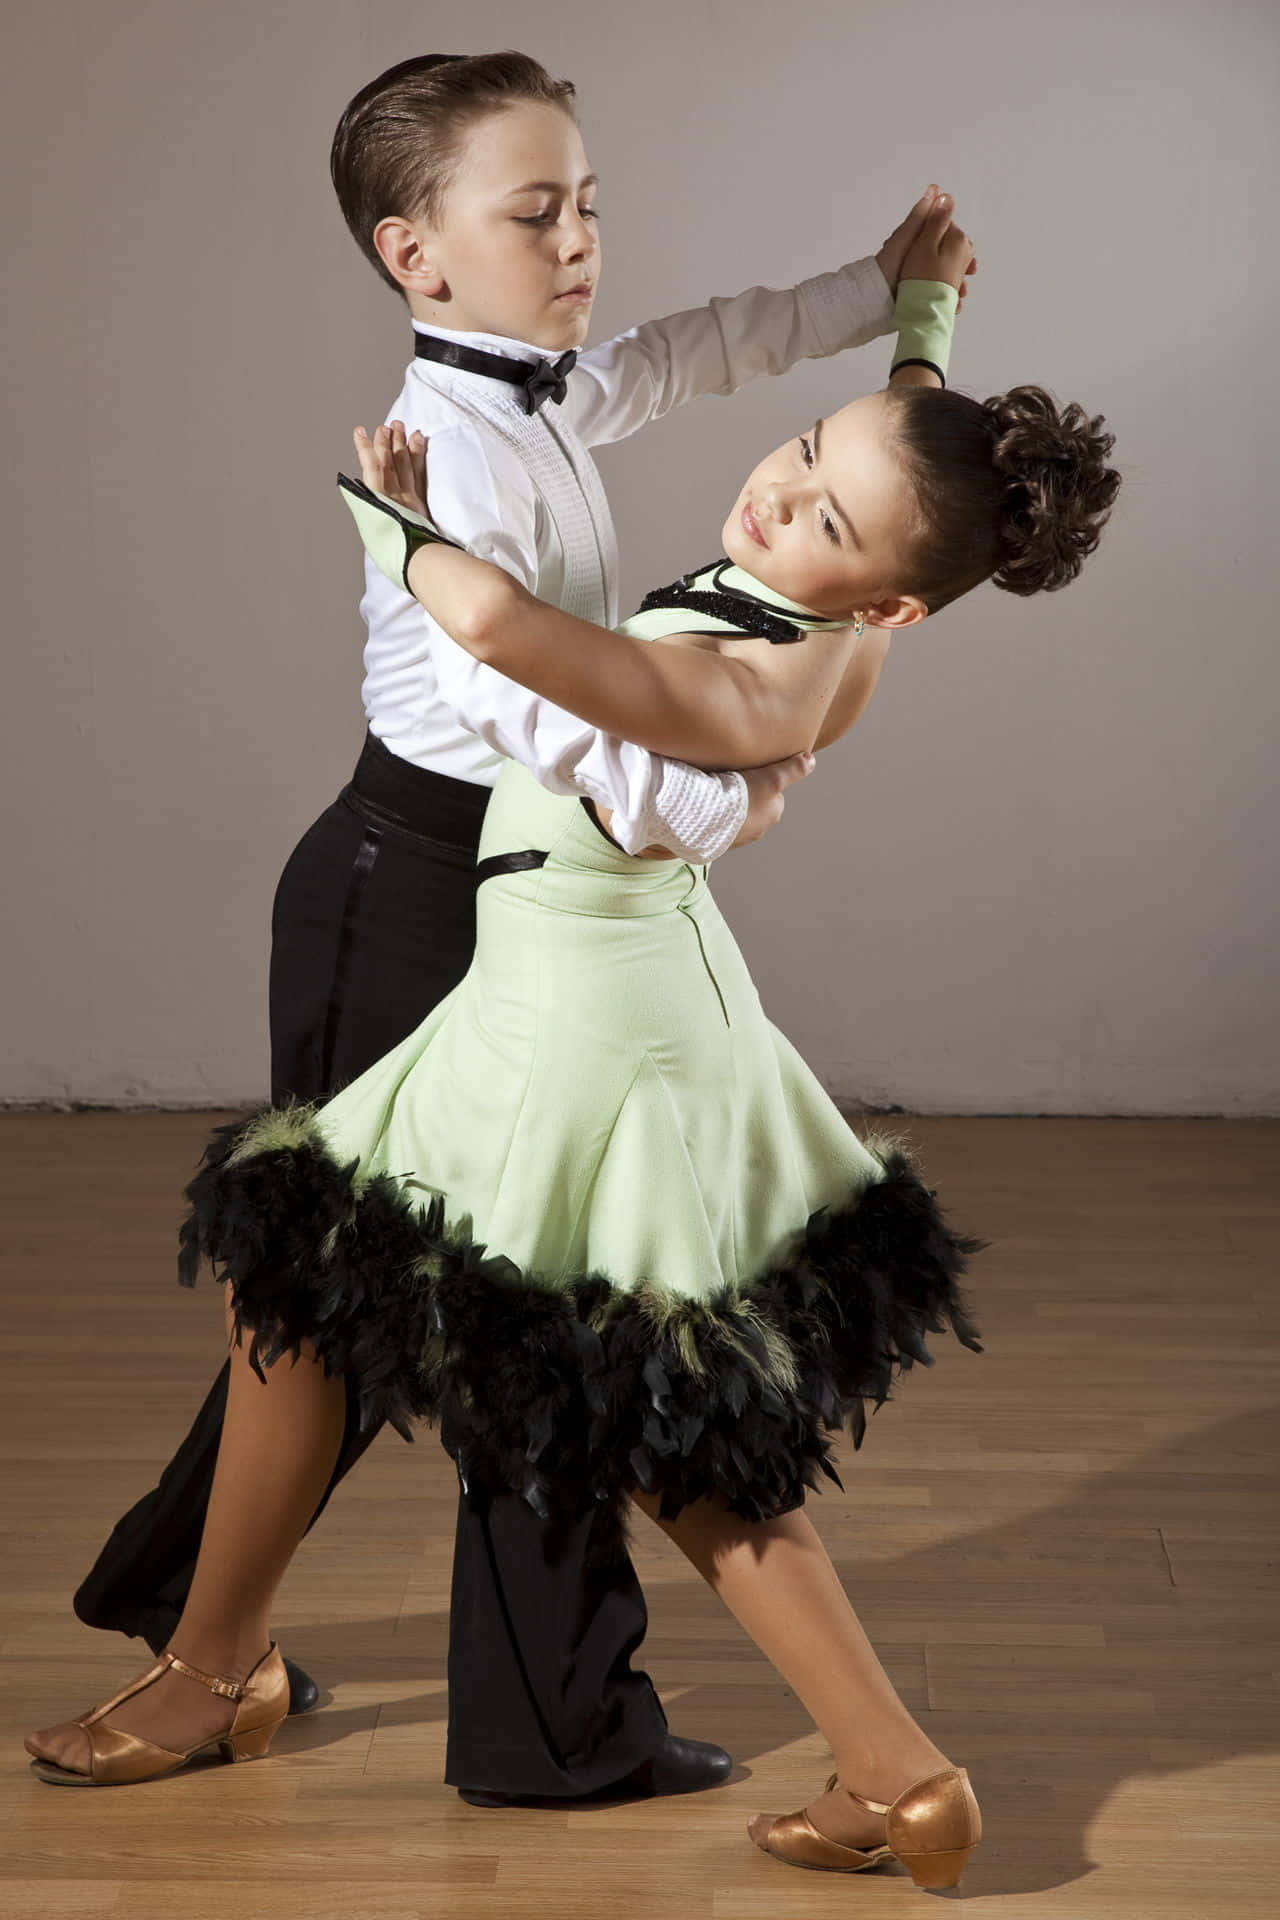 A Young Boy And Girl Dancing In A Dance Studio